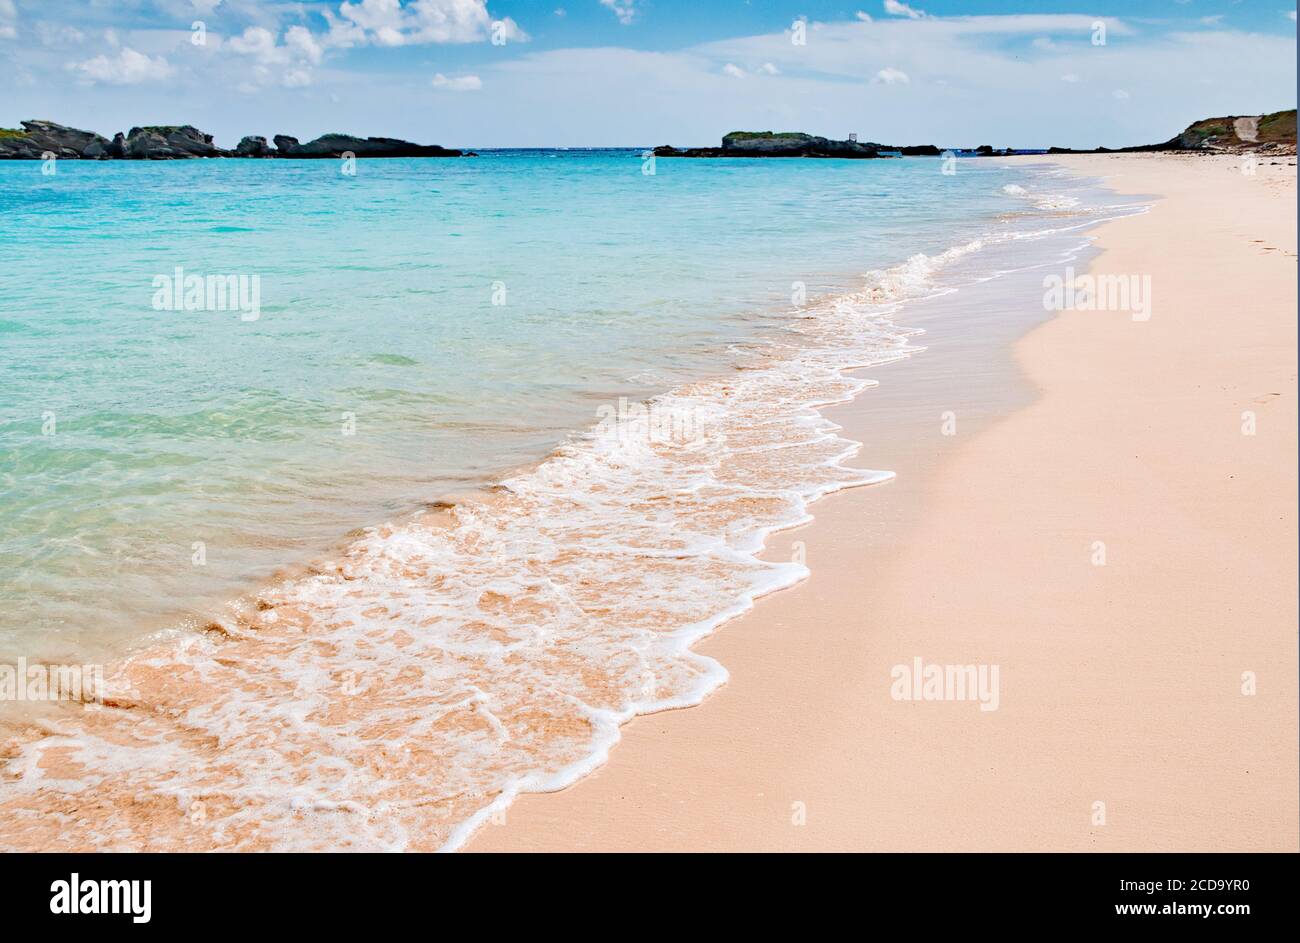 Scenic pink sand beach laced with ocean waves in Copper's Island, Bermuda Stock Photo